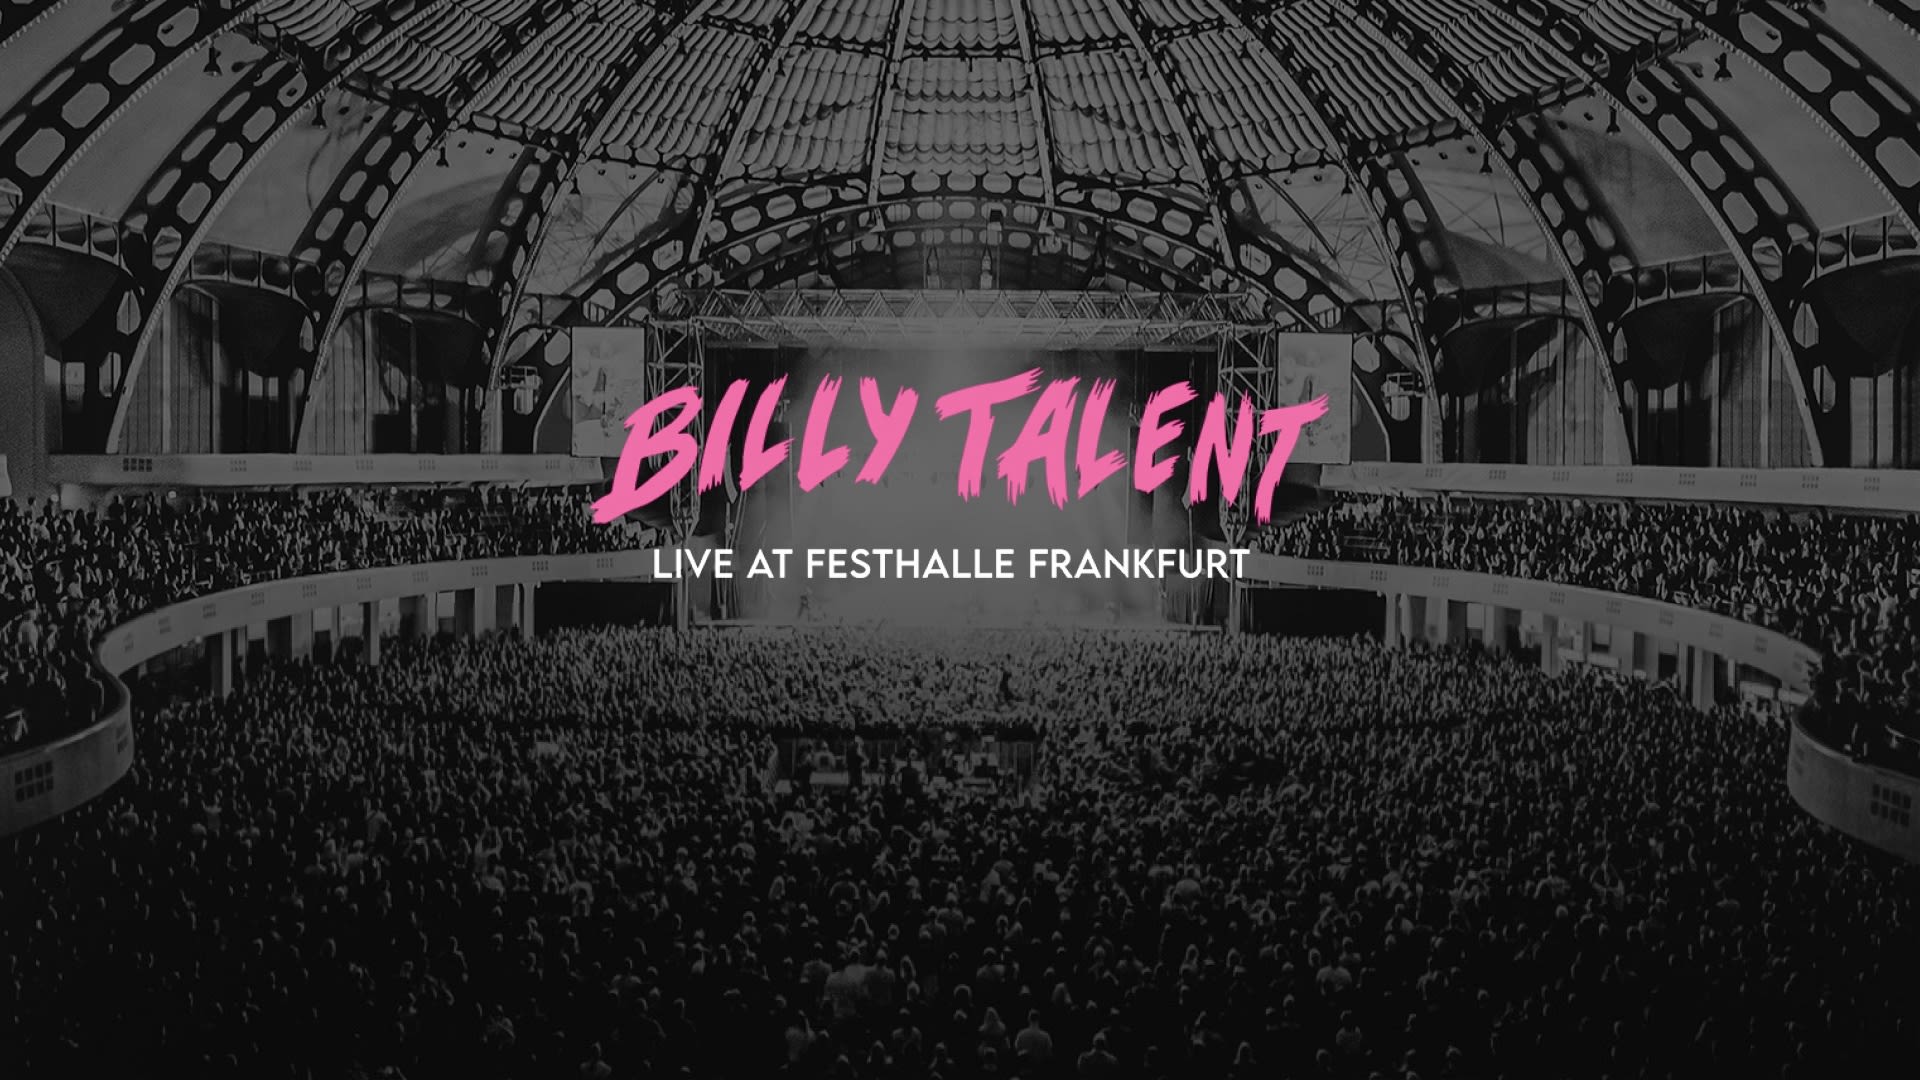 Billy Talent live at Frankfurt Festhalle in Germany